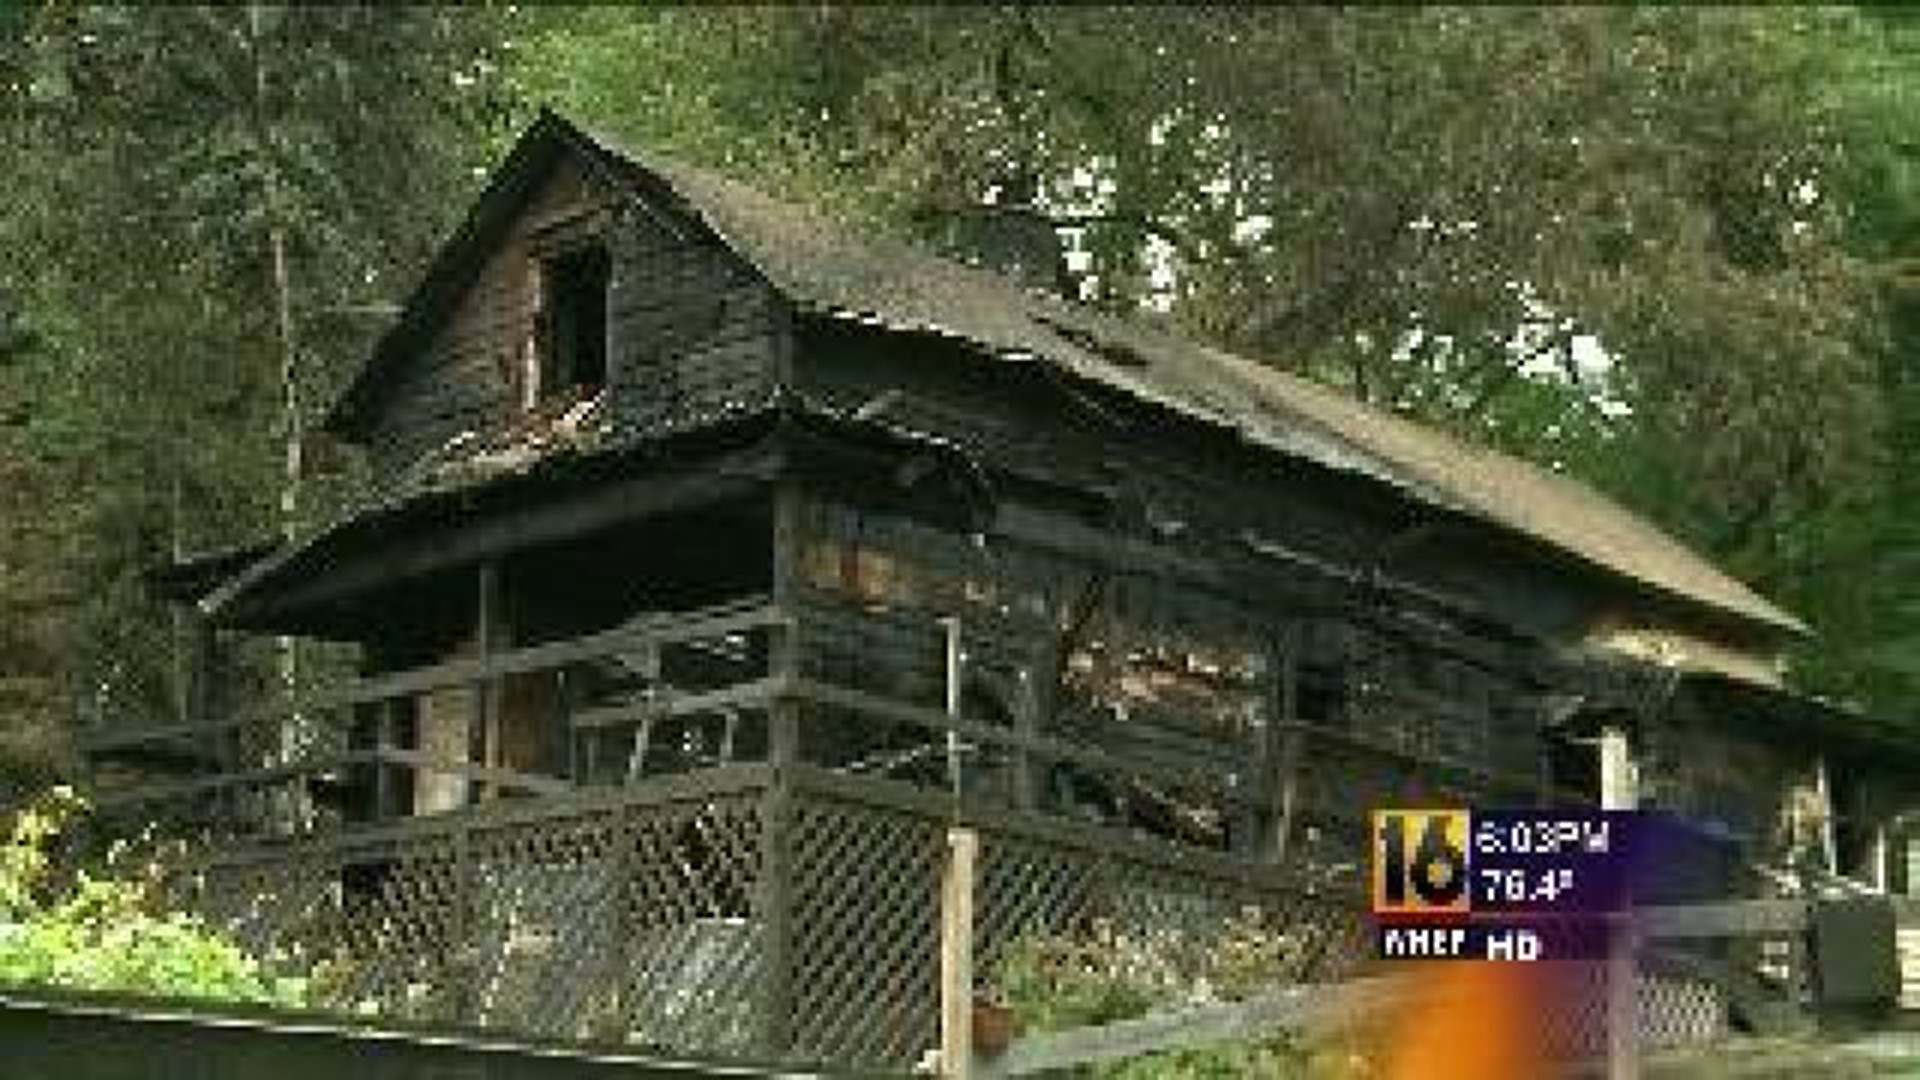 Teen Jumped from Burning Home